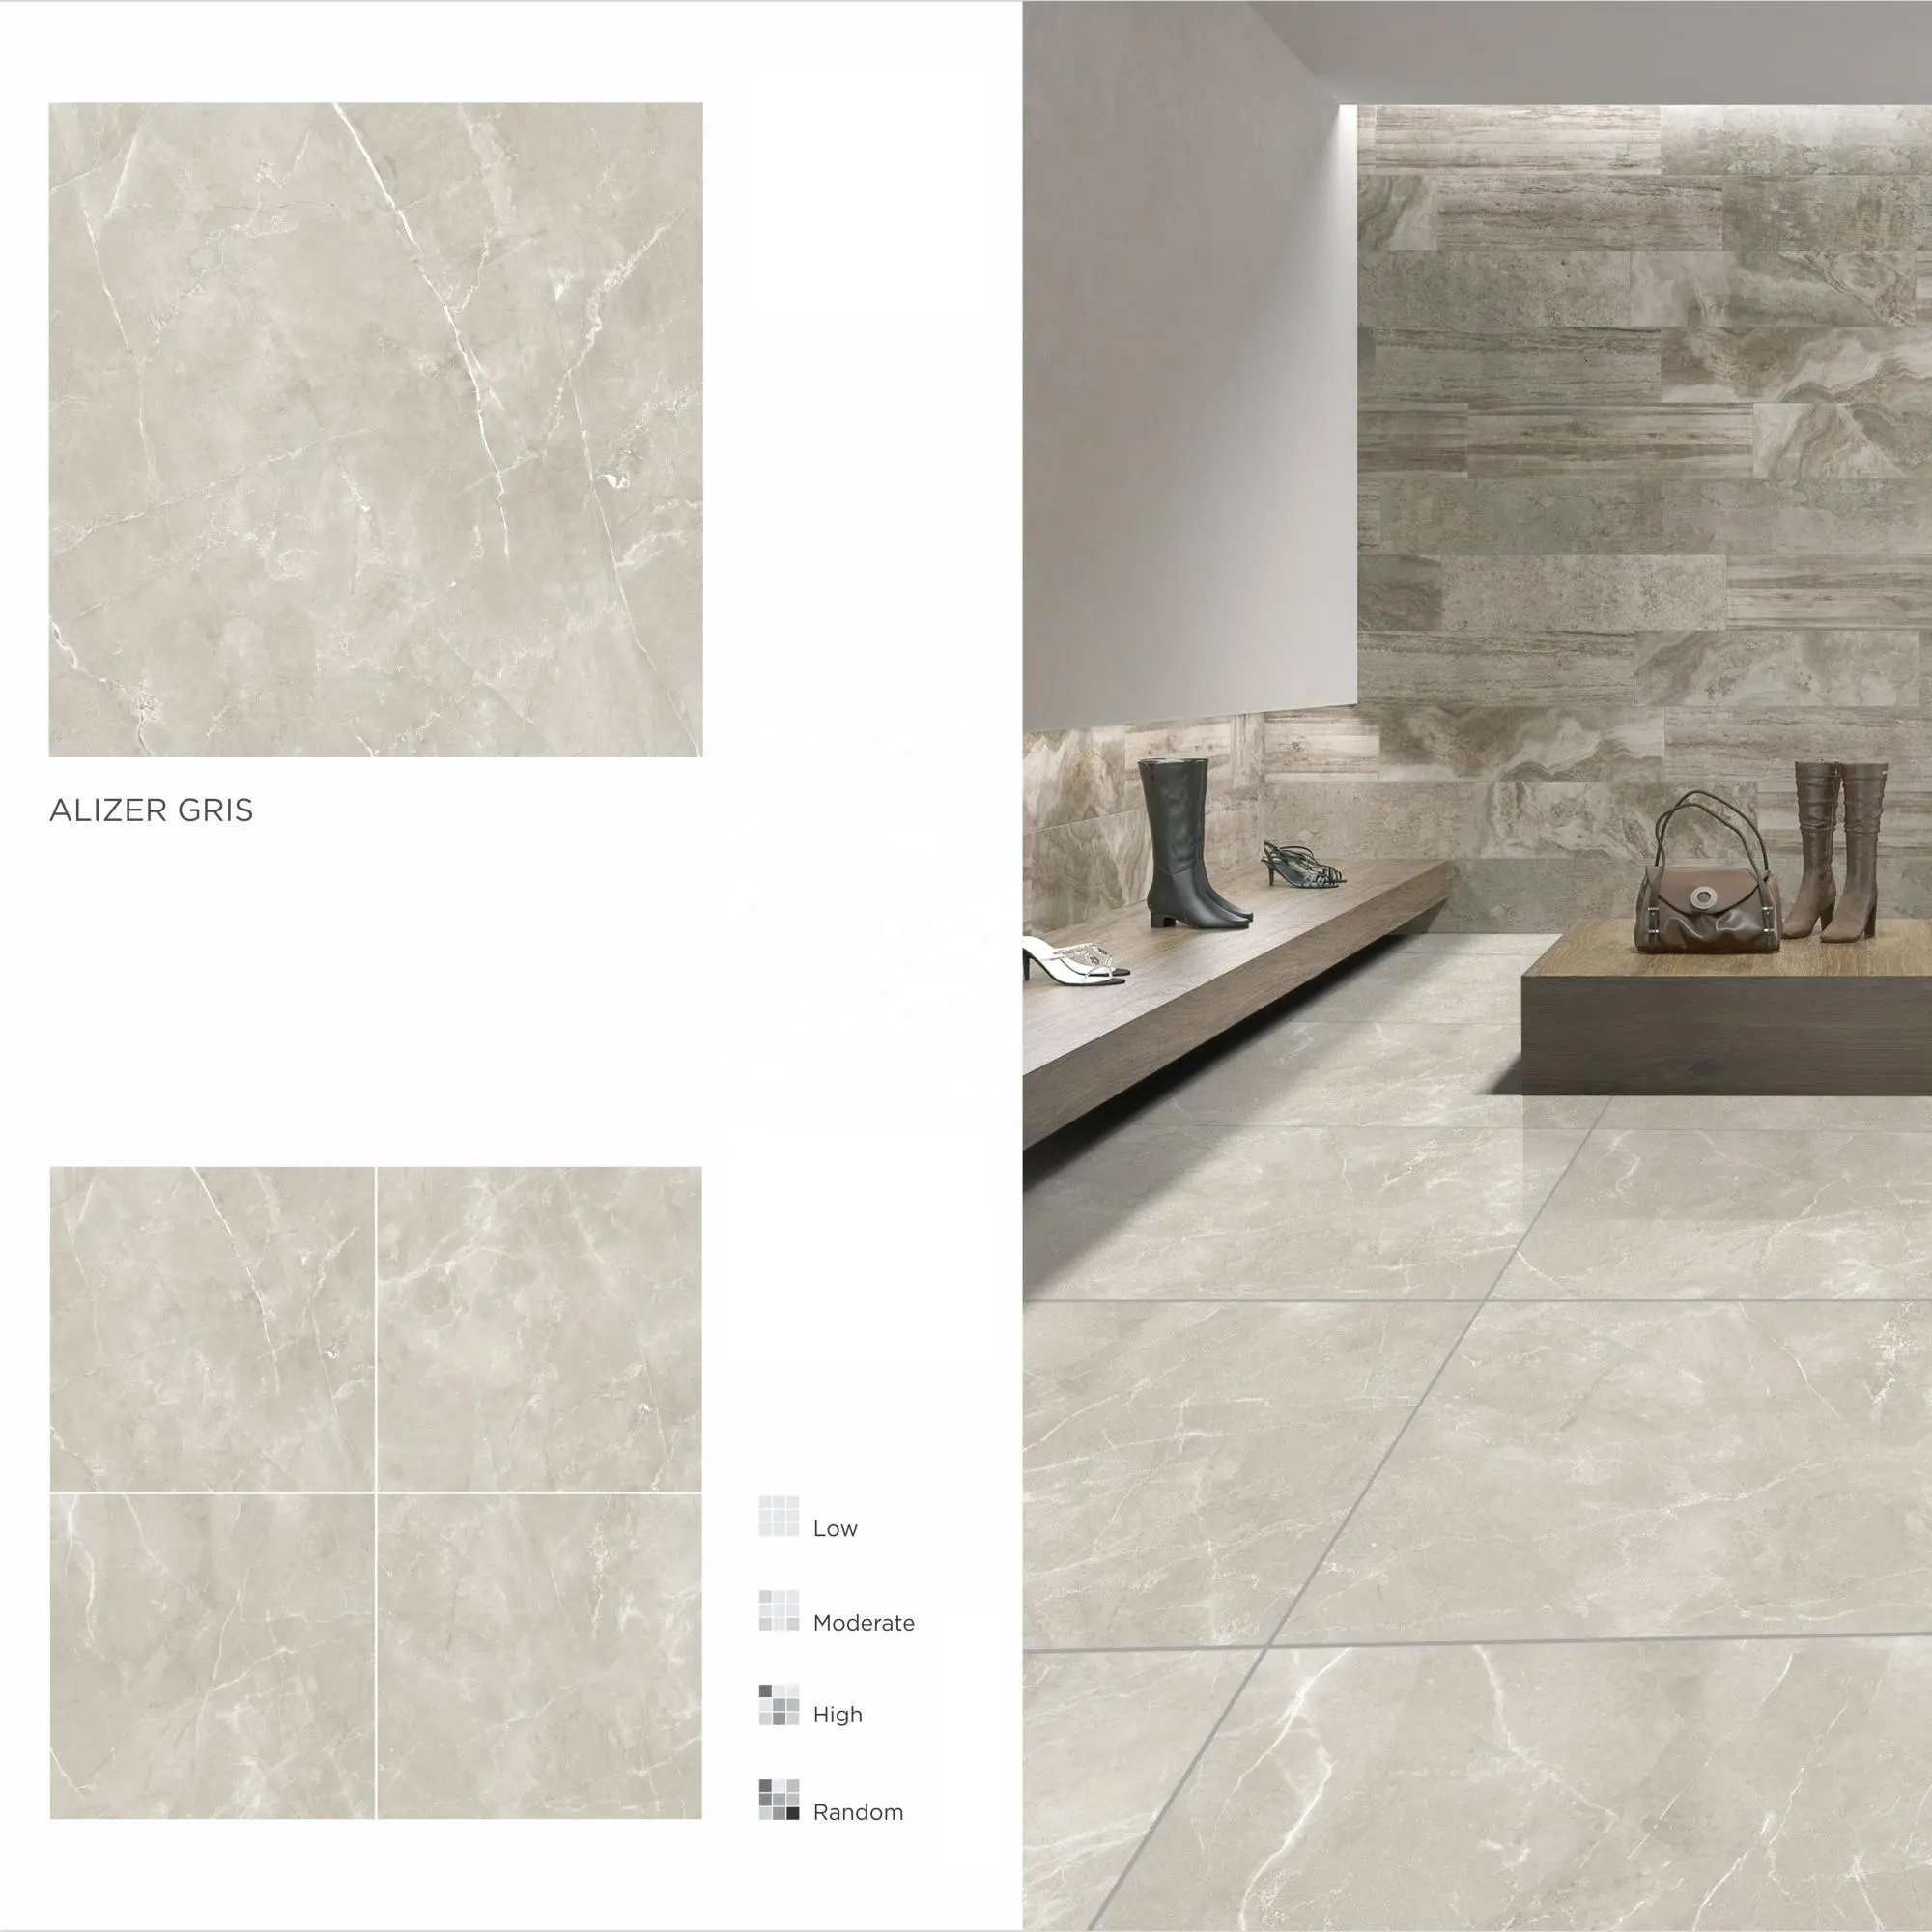 Export Quality Alizer Gris PGVT Porcelain Floor Tile - 800x800mm, Full Body Inkjet Polished Glazed, First Choice, Cheap Price